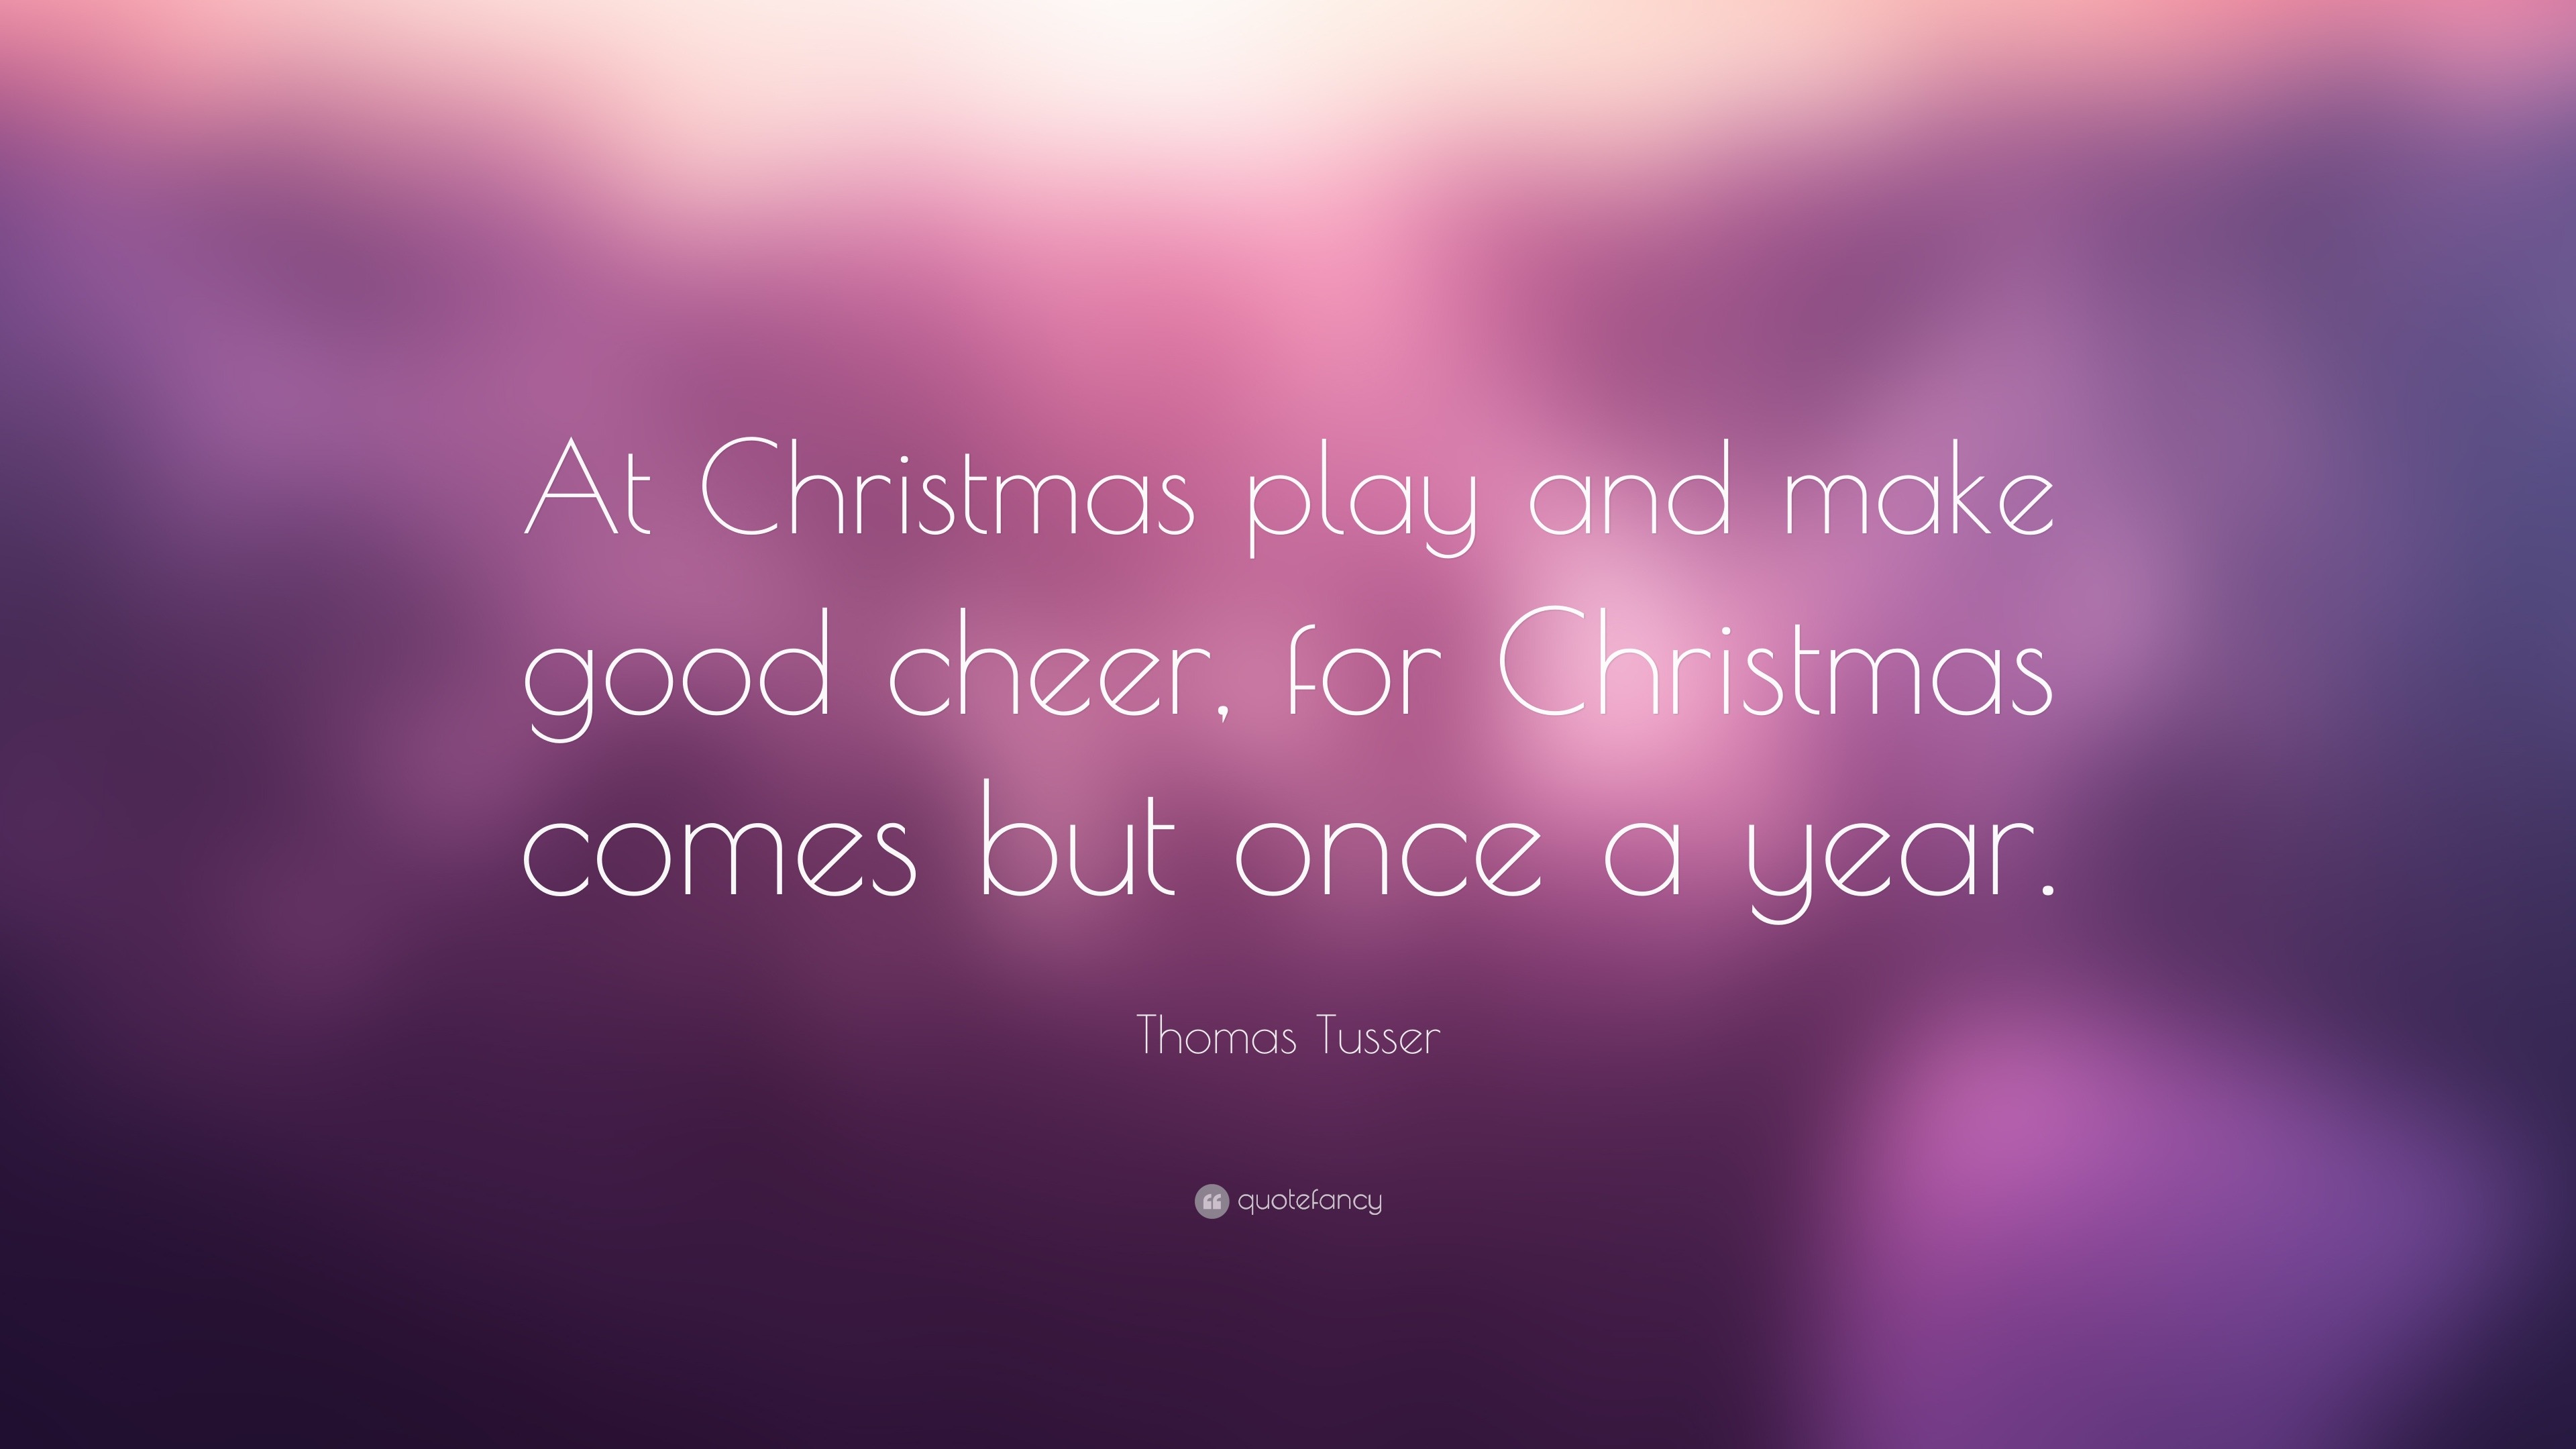 Thomas Tusser Quote: “At Christmas play and make good cheer, for ...